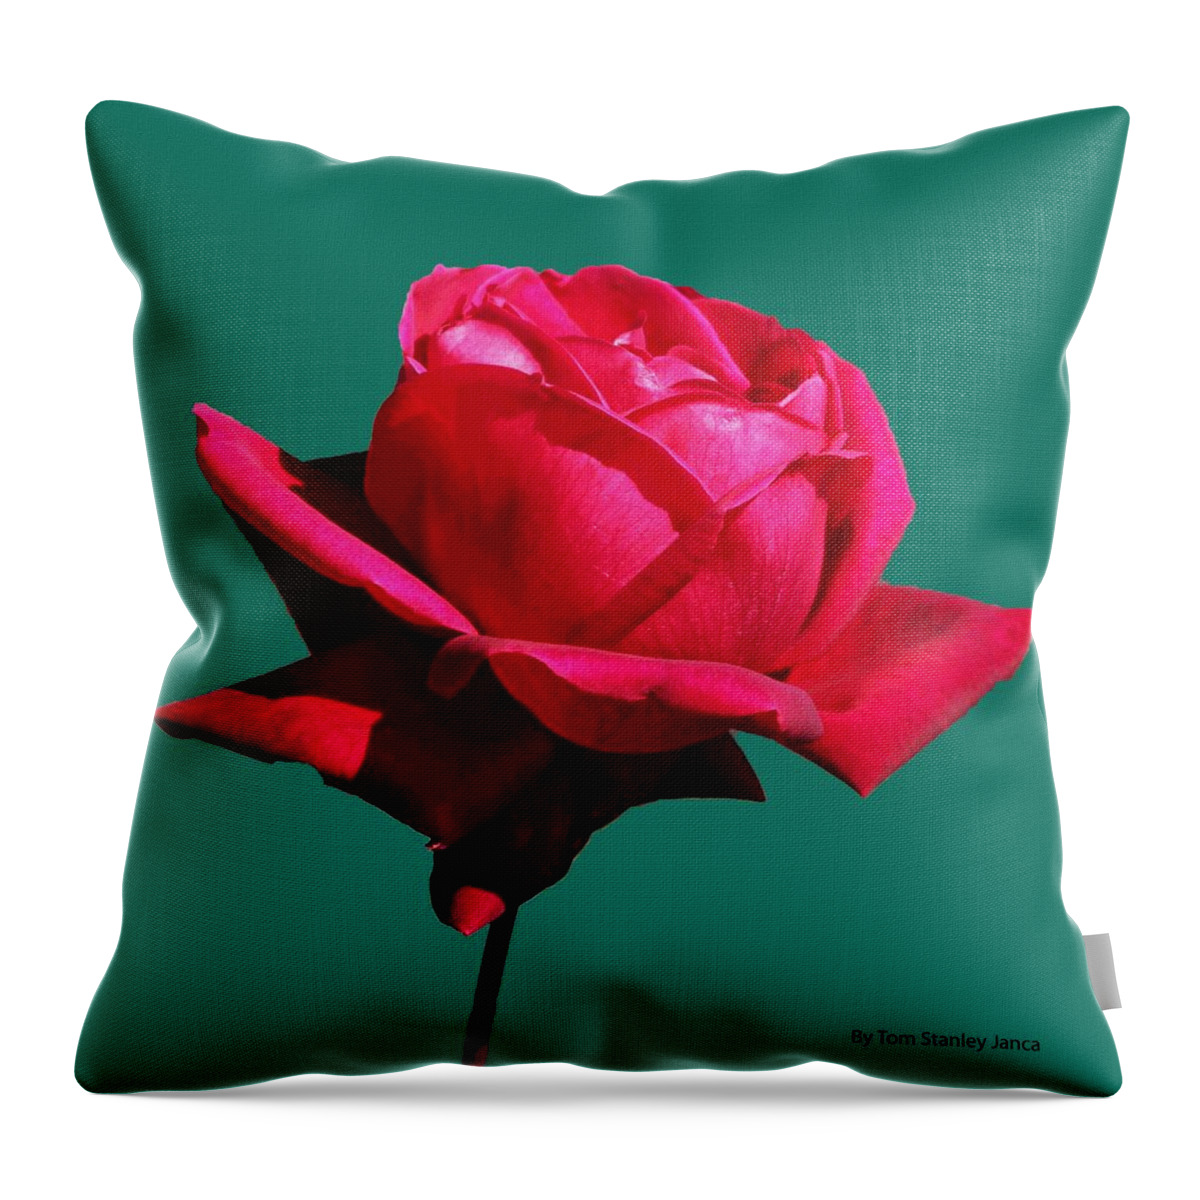  Big Red Rose Throw Pillow featuring the photograph A Big Red Rose by Tom Janca